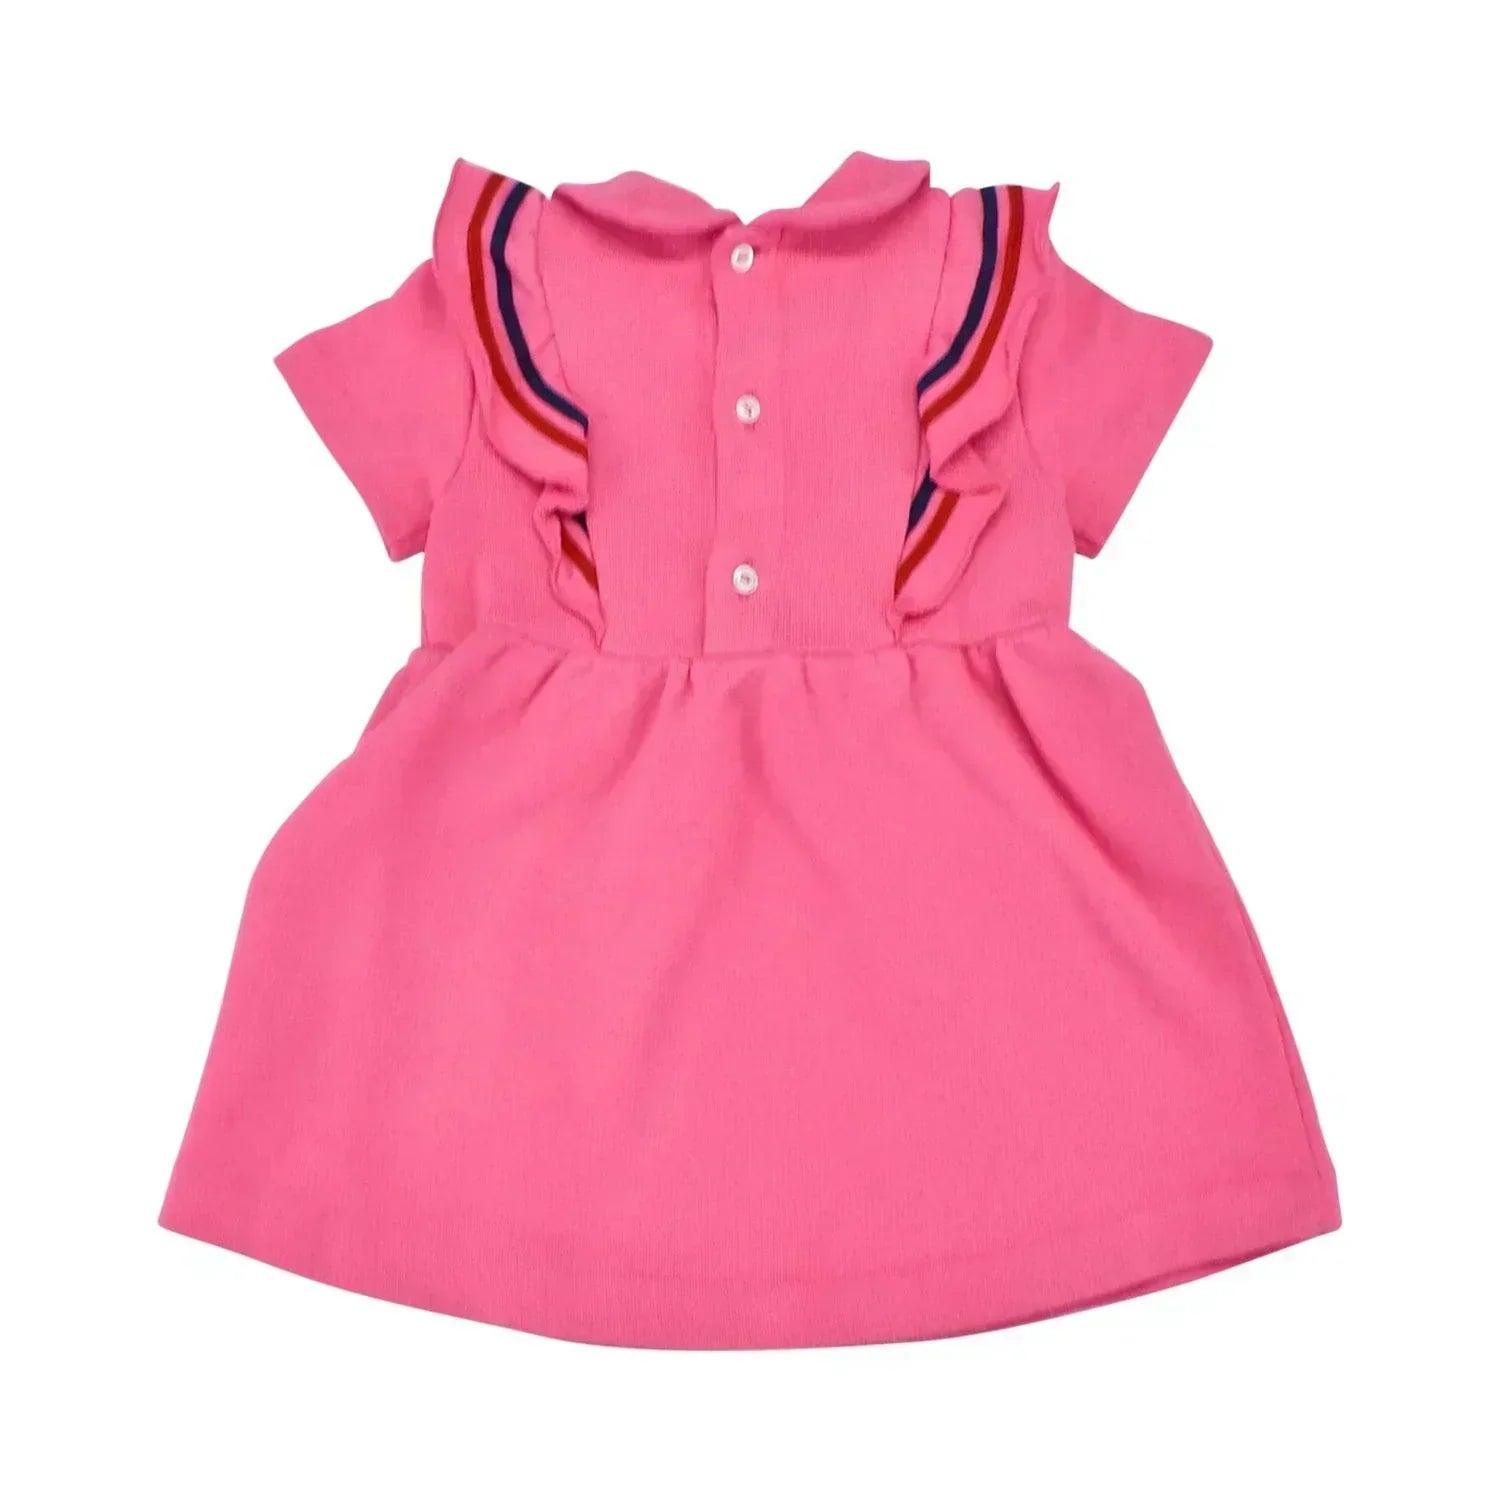 Gucci Dress - Baby 9-12M - Fashionably Yours